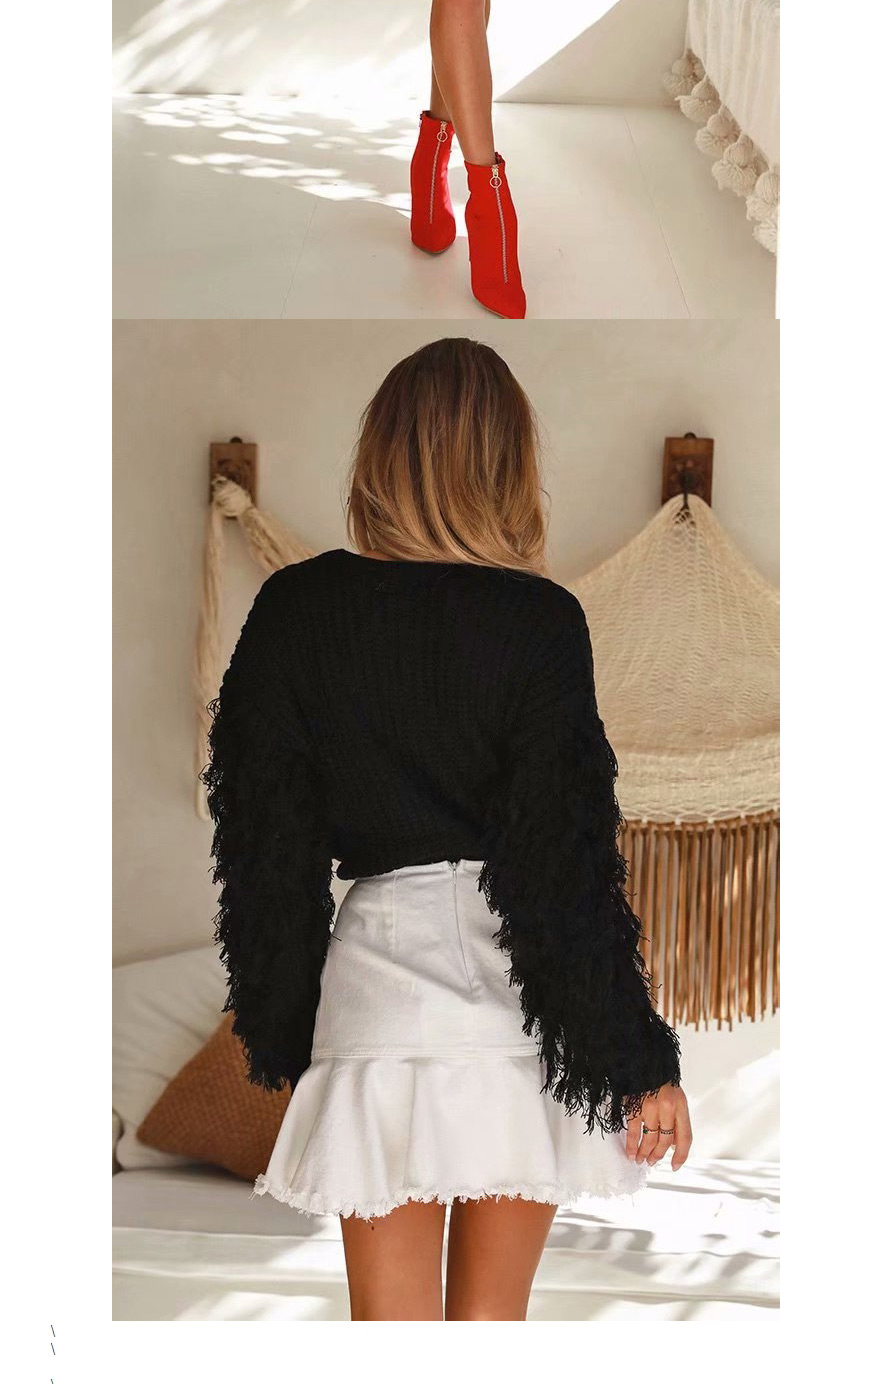 Fashion Red Wine Fringed Long Sleeve Knit Pullover,Sweater